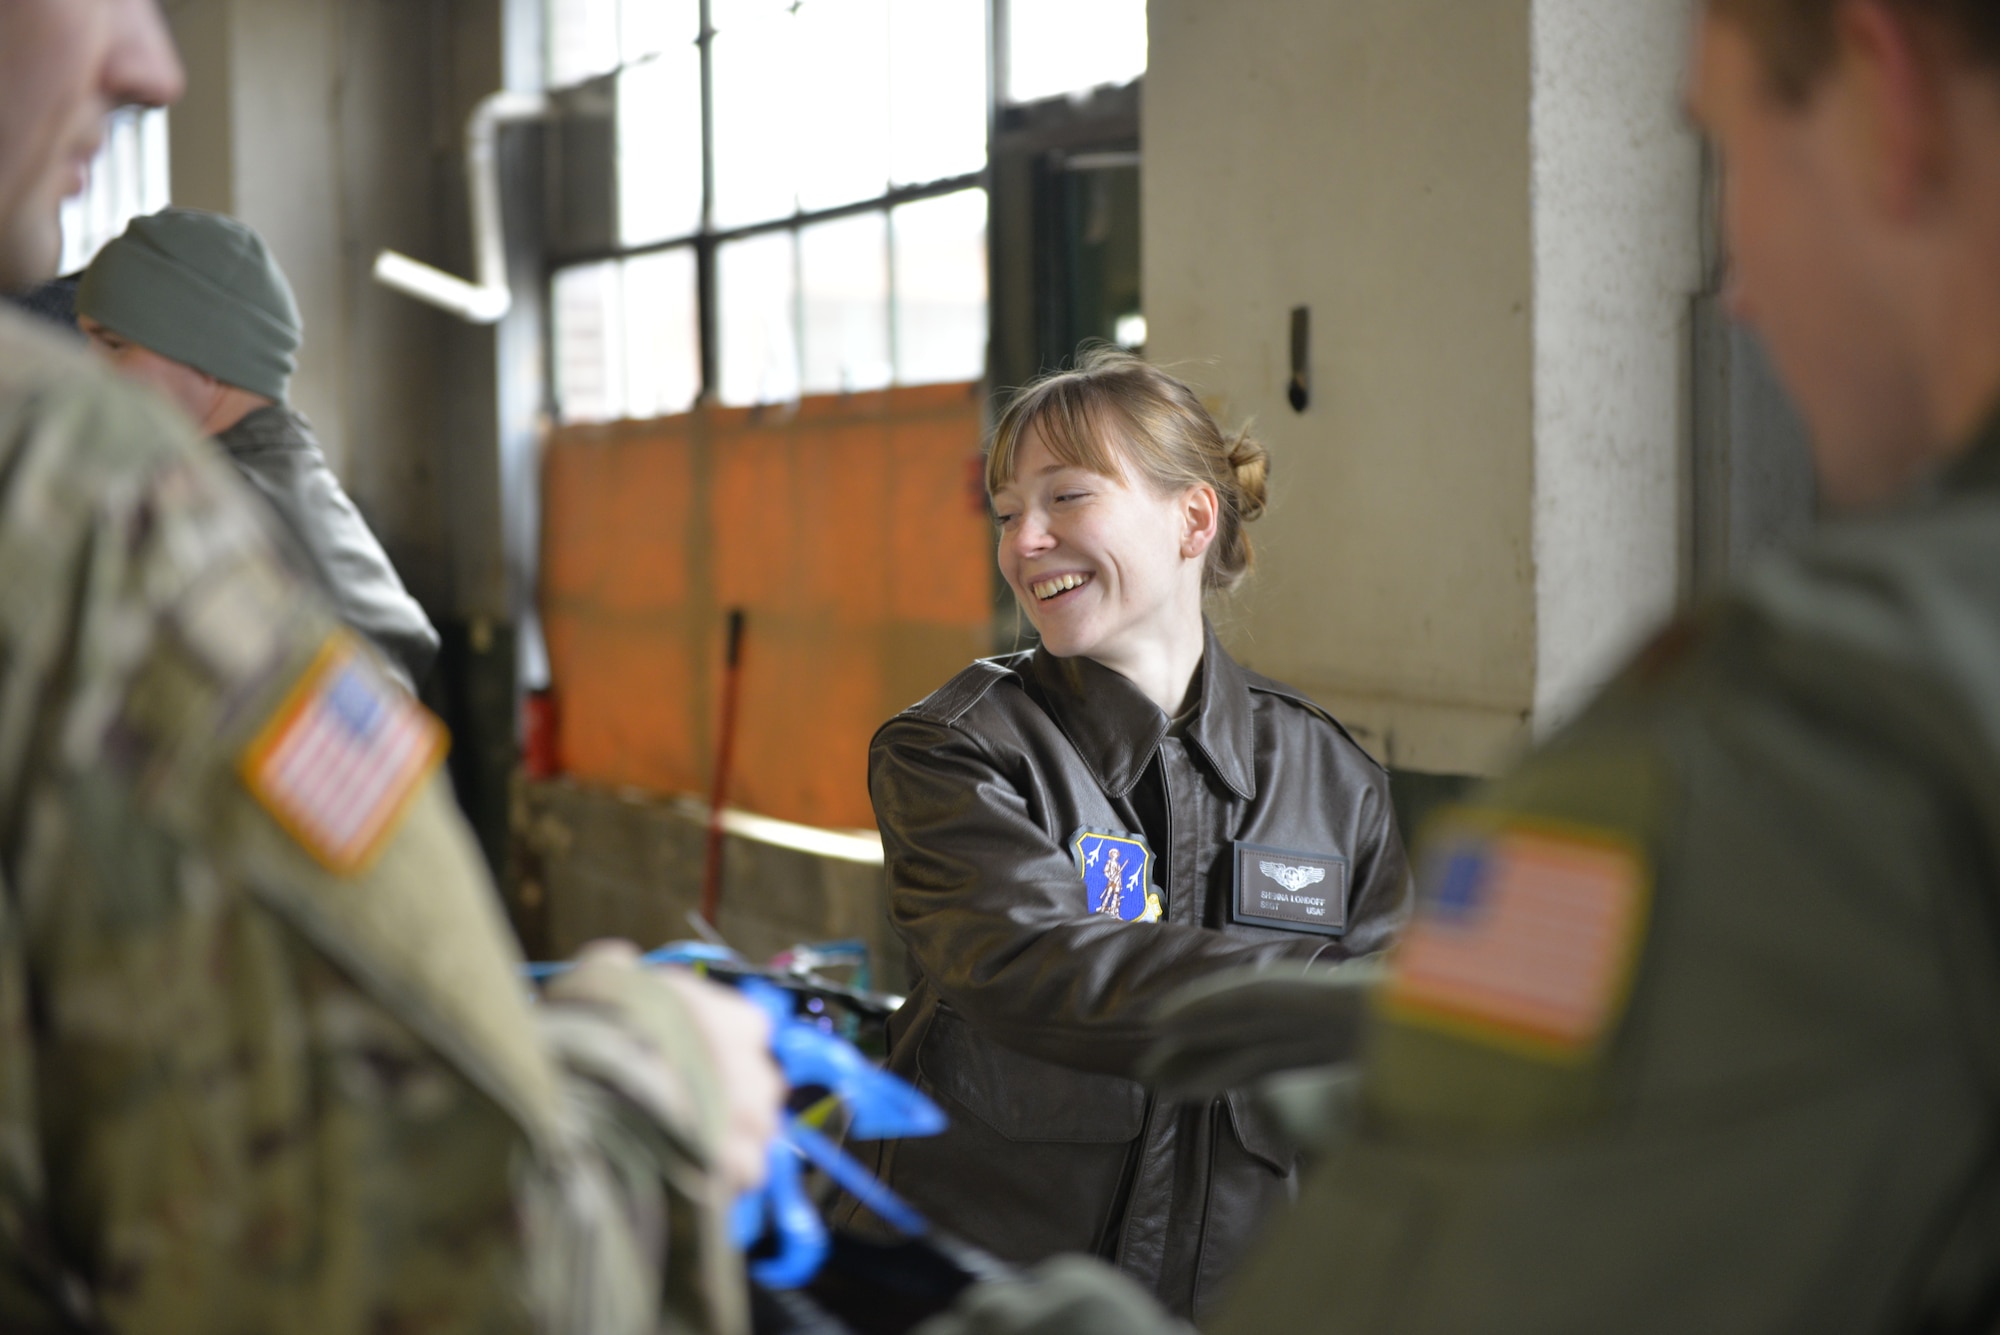 Staff Sgt. Shenna Londoff with the 157th Operations Group, New Hampshire Air National Guard, helps load donated Christmas gifts as part of Operation Santa Claus on Dec. 16 in Concord. Volunteers from the State Employees' Association, SEIU Local 1984, partner with N.H. guardsmen annually to transport presents to distribution points throughout the state. The program has been led by the SEA since 1960, and ensures gifts are provided to thousands of NH children in need. (U.S. Air National Guard photo by Tech. Sgt. Aaron Vezeau)